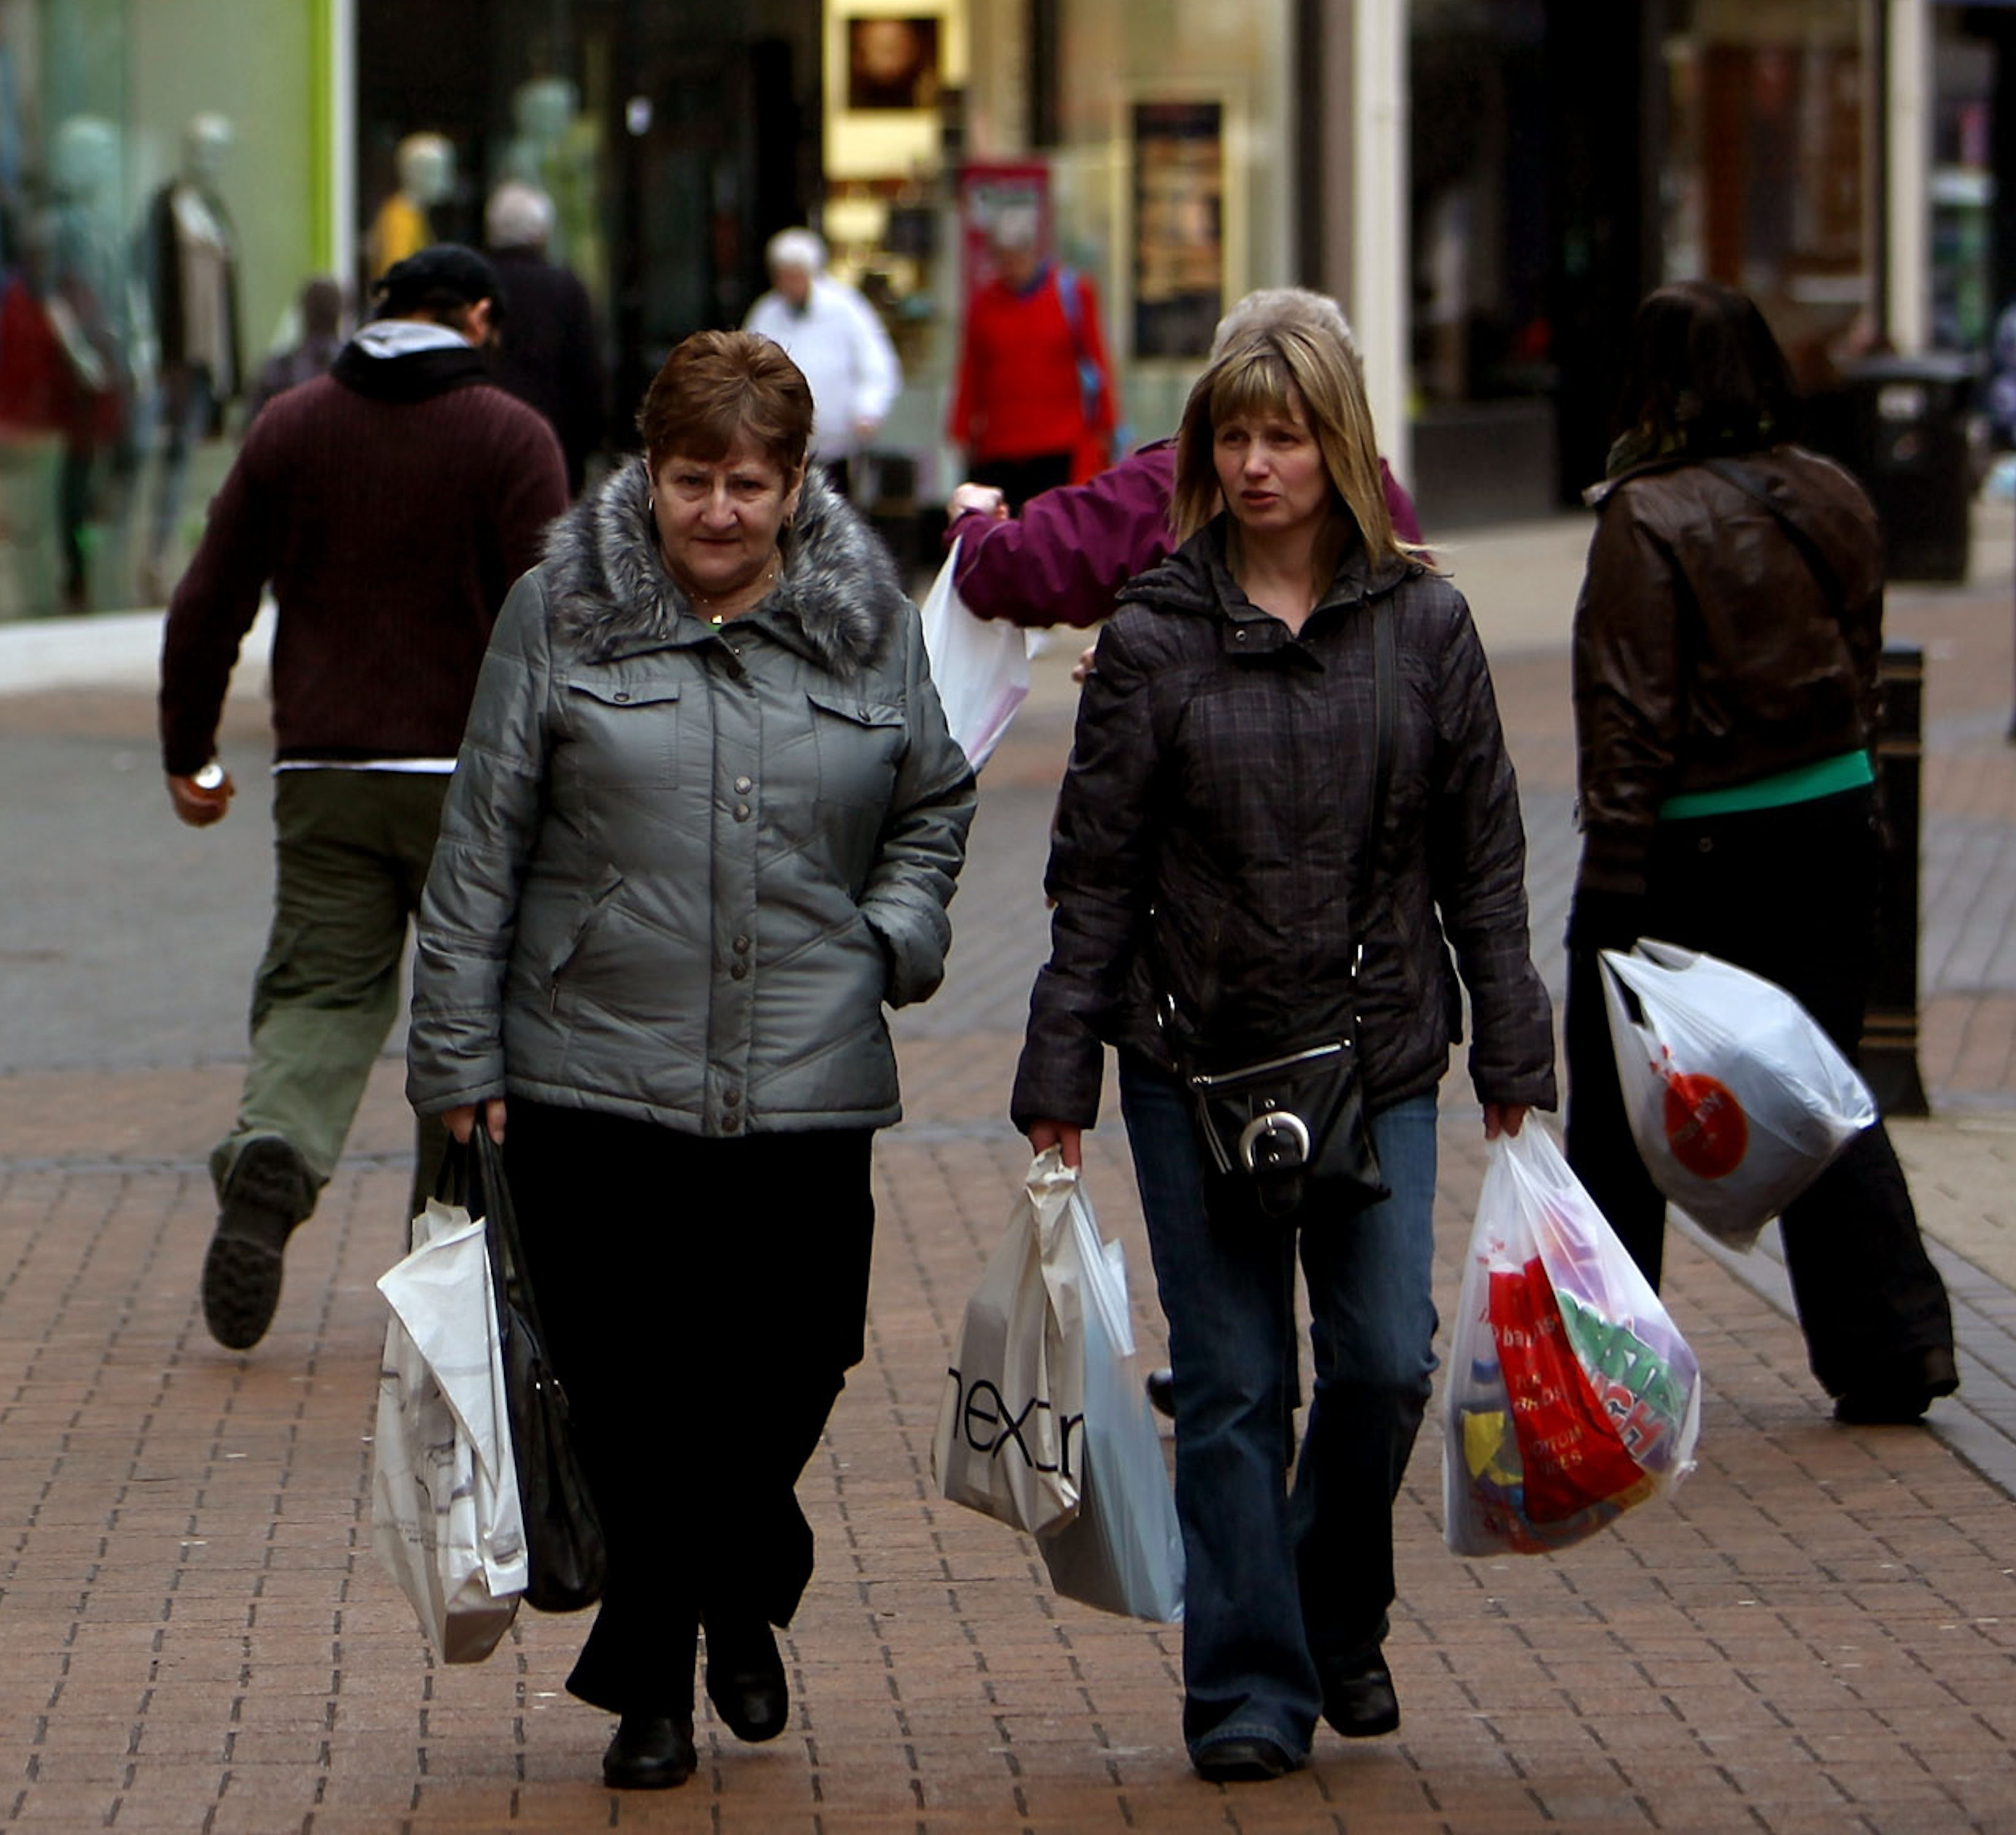 Shoppers on a UK high street